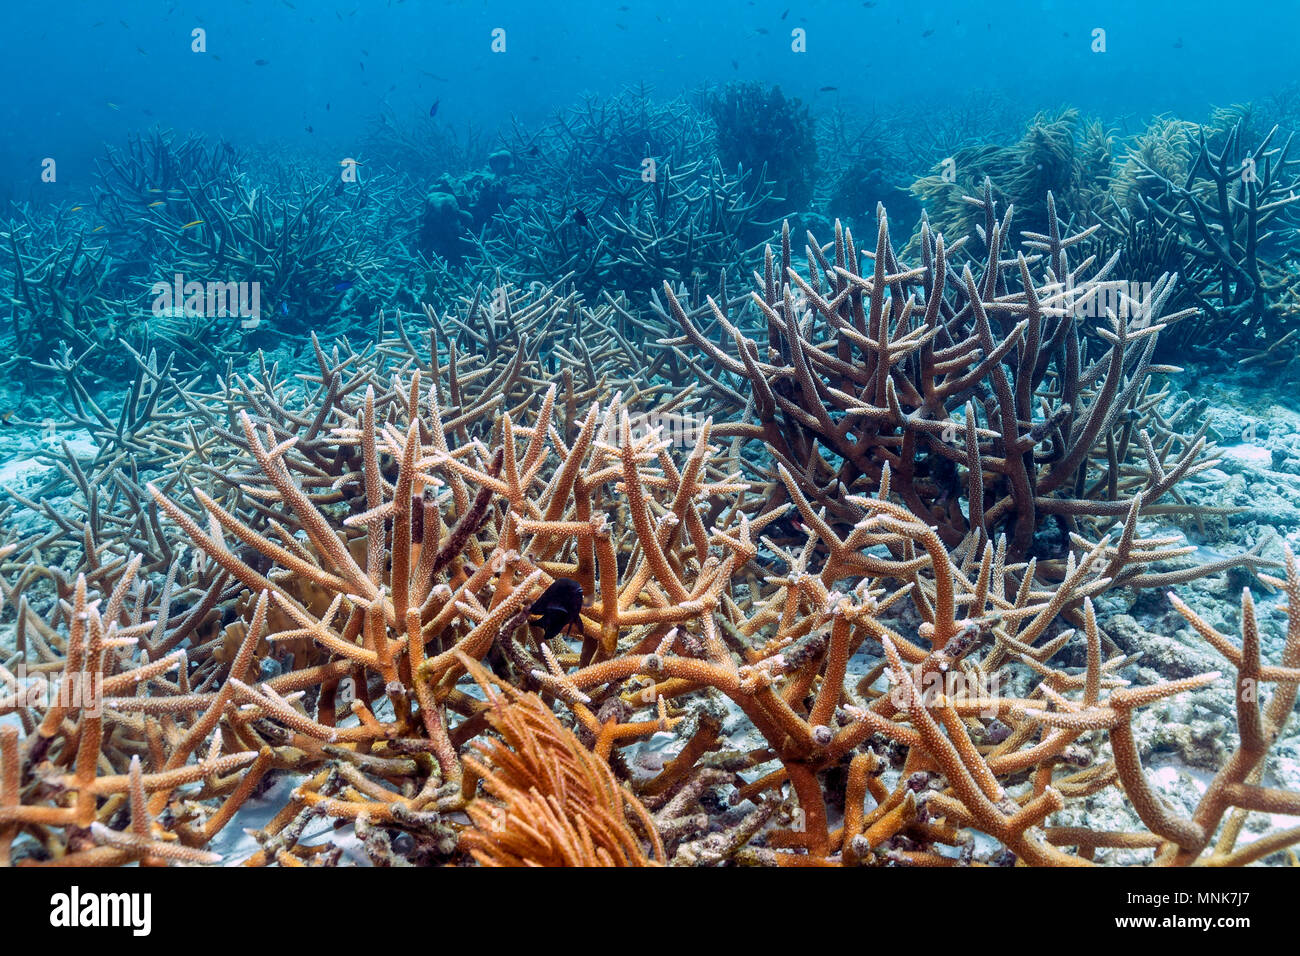 Coral reef in Carbiiean Sea off coast of Bonaire staghorn coral,Acropora cervicornis Stock Photo